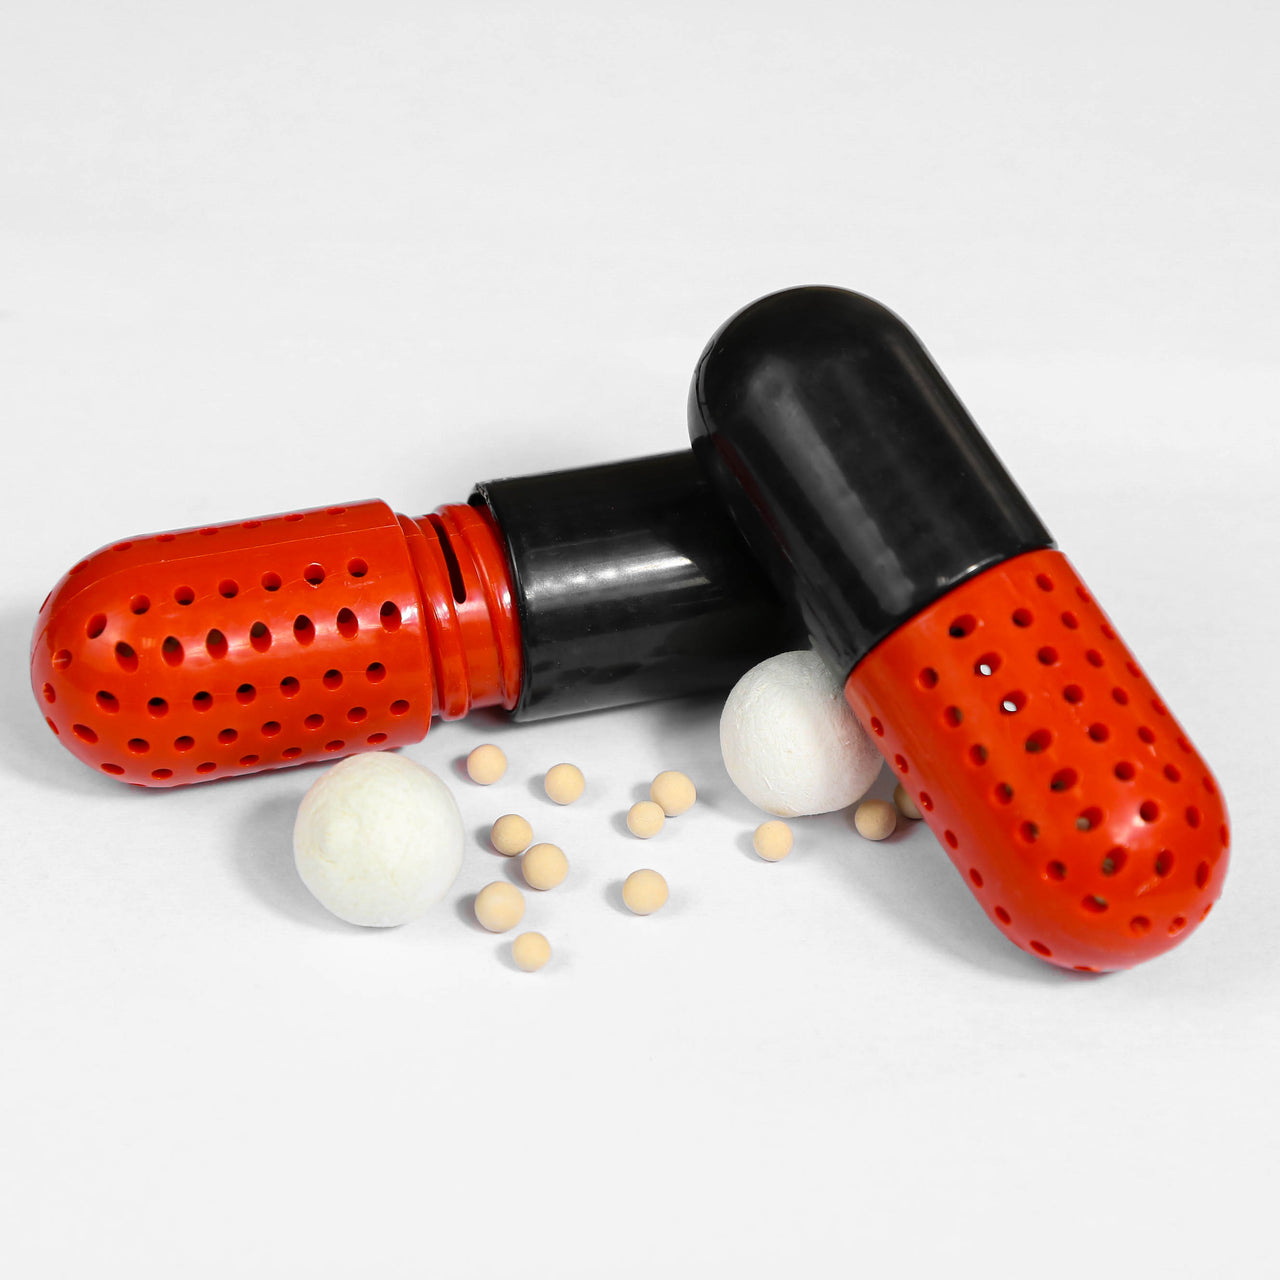 Two Pill Shape Sneaker Deodorizer Matching Bred 11s | Red And Black Sneaker Deodorizers